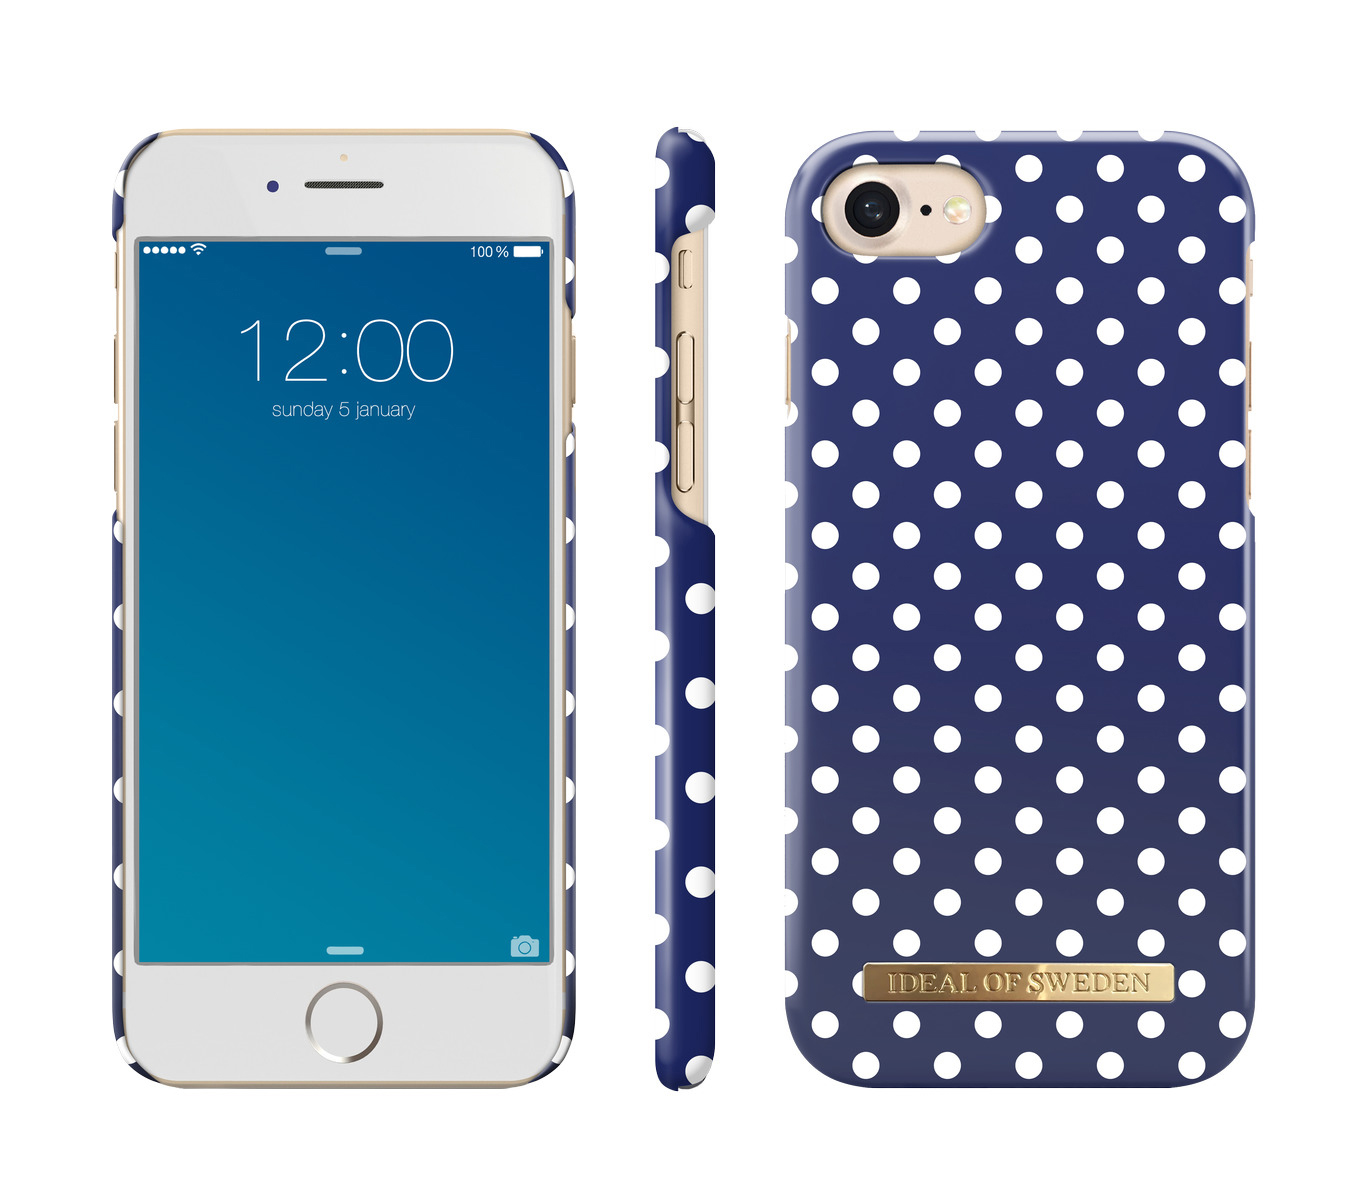 Polka 6, 7, OF IDEAL iPhone iPhone Apple, 8, Backcover, iPhone SWEDEN Dots Fashion,